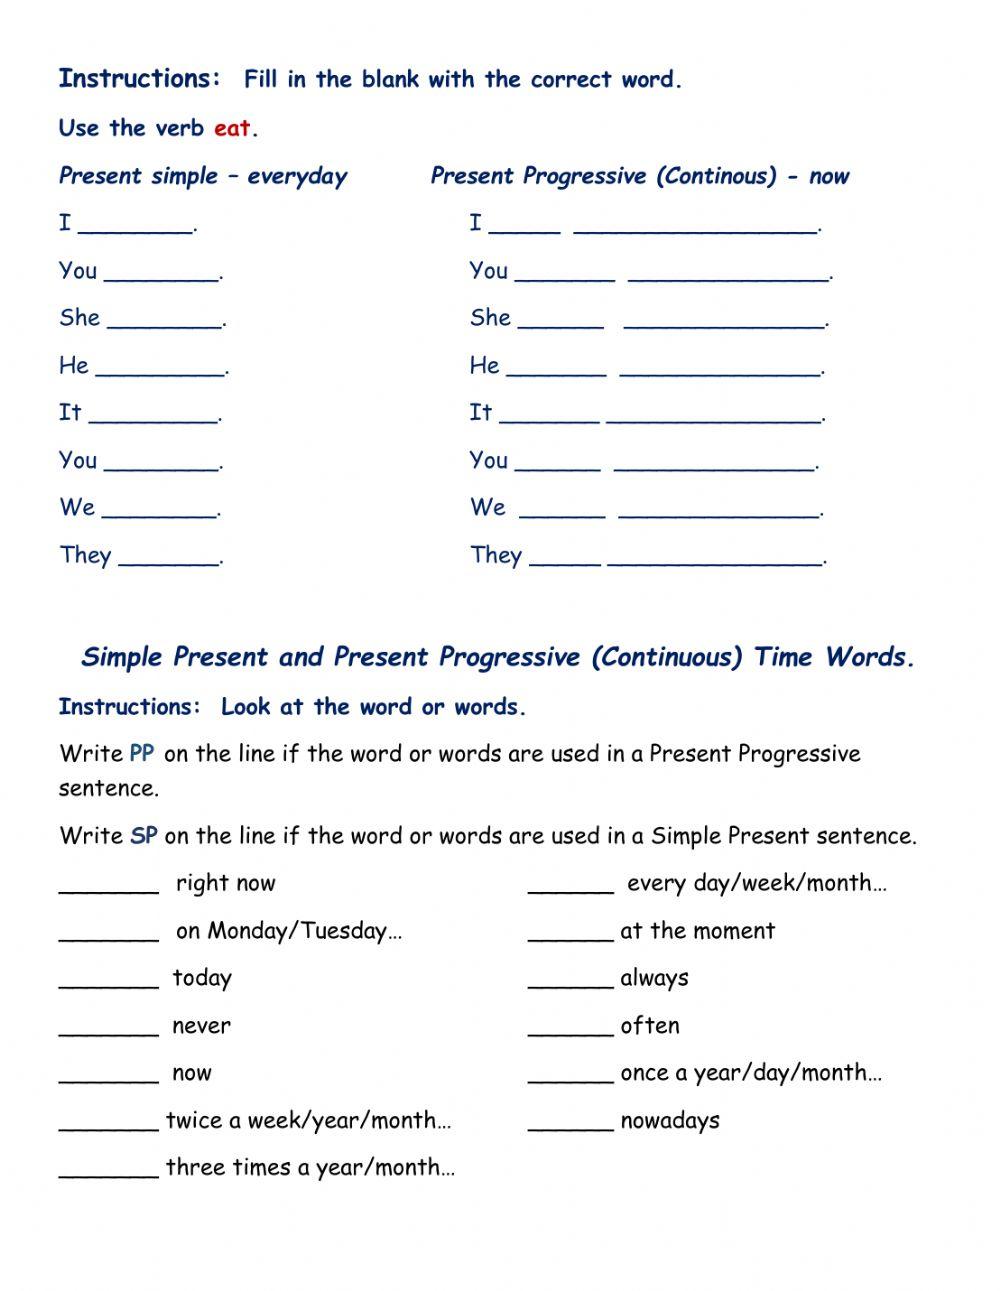 Present Simple and Present Progressive time words